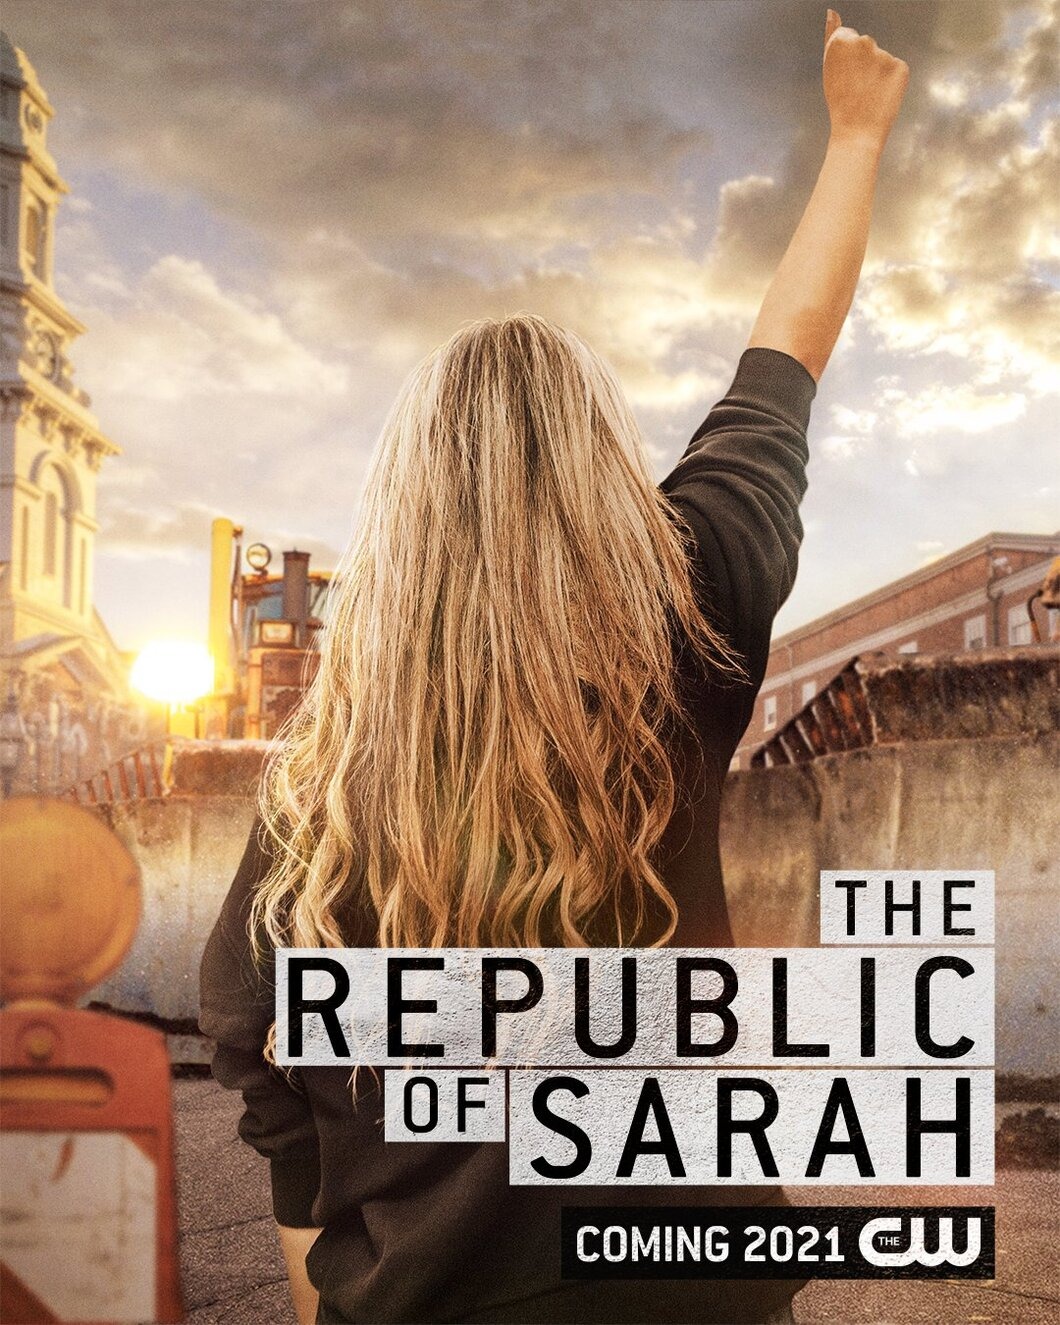 Extra Large TV Poster Image for The Republic of Sarah (#1 of 2)